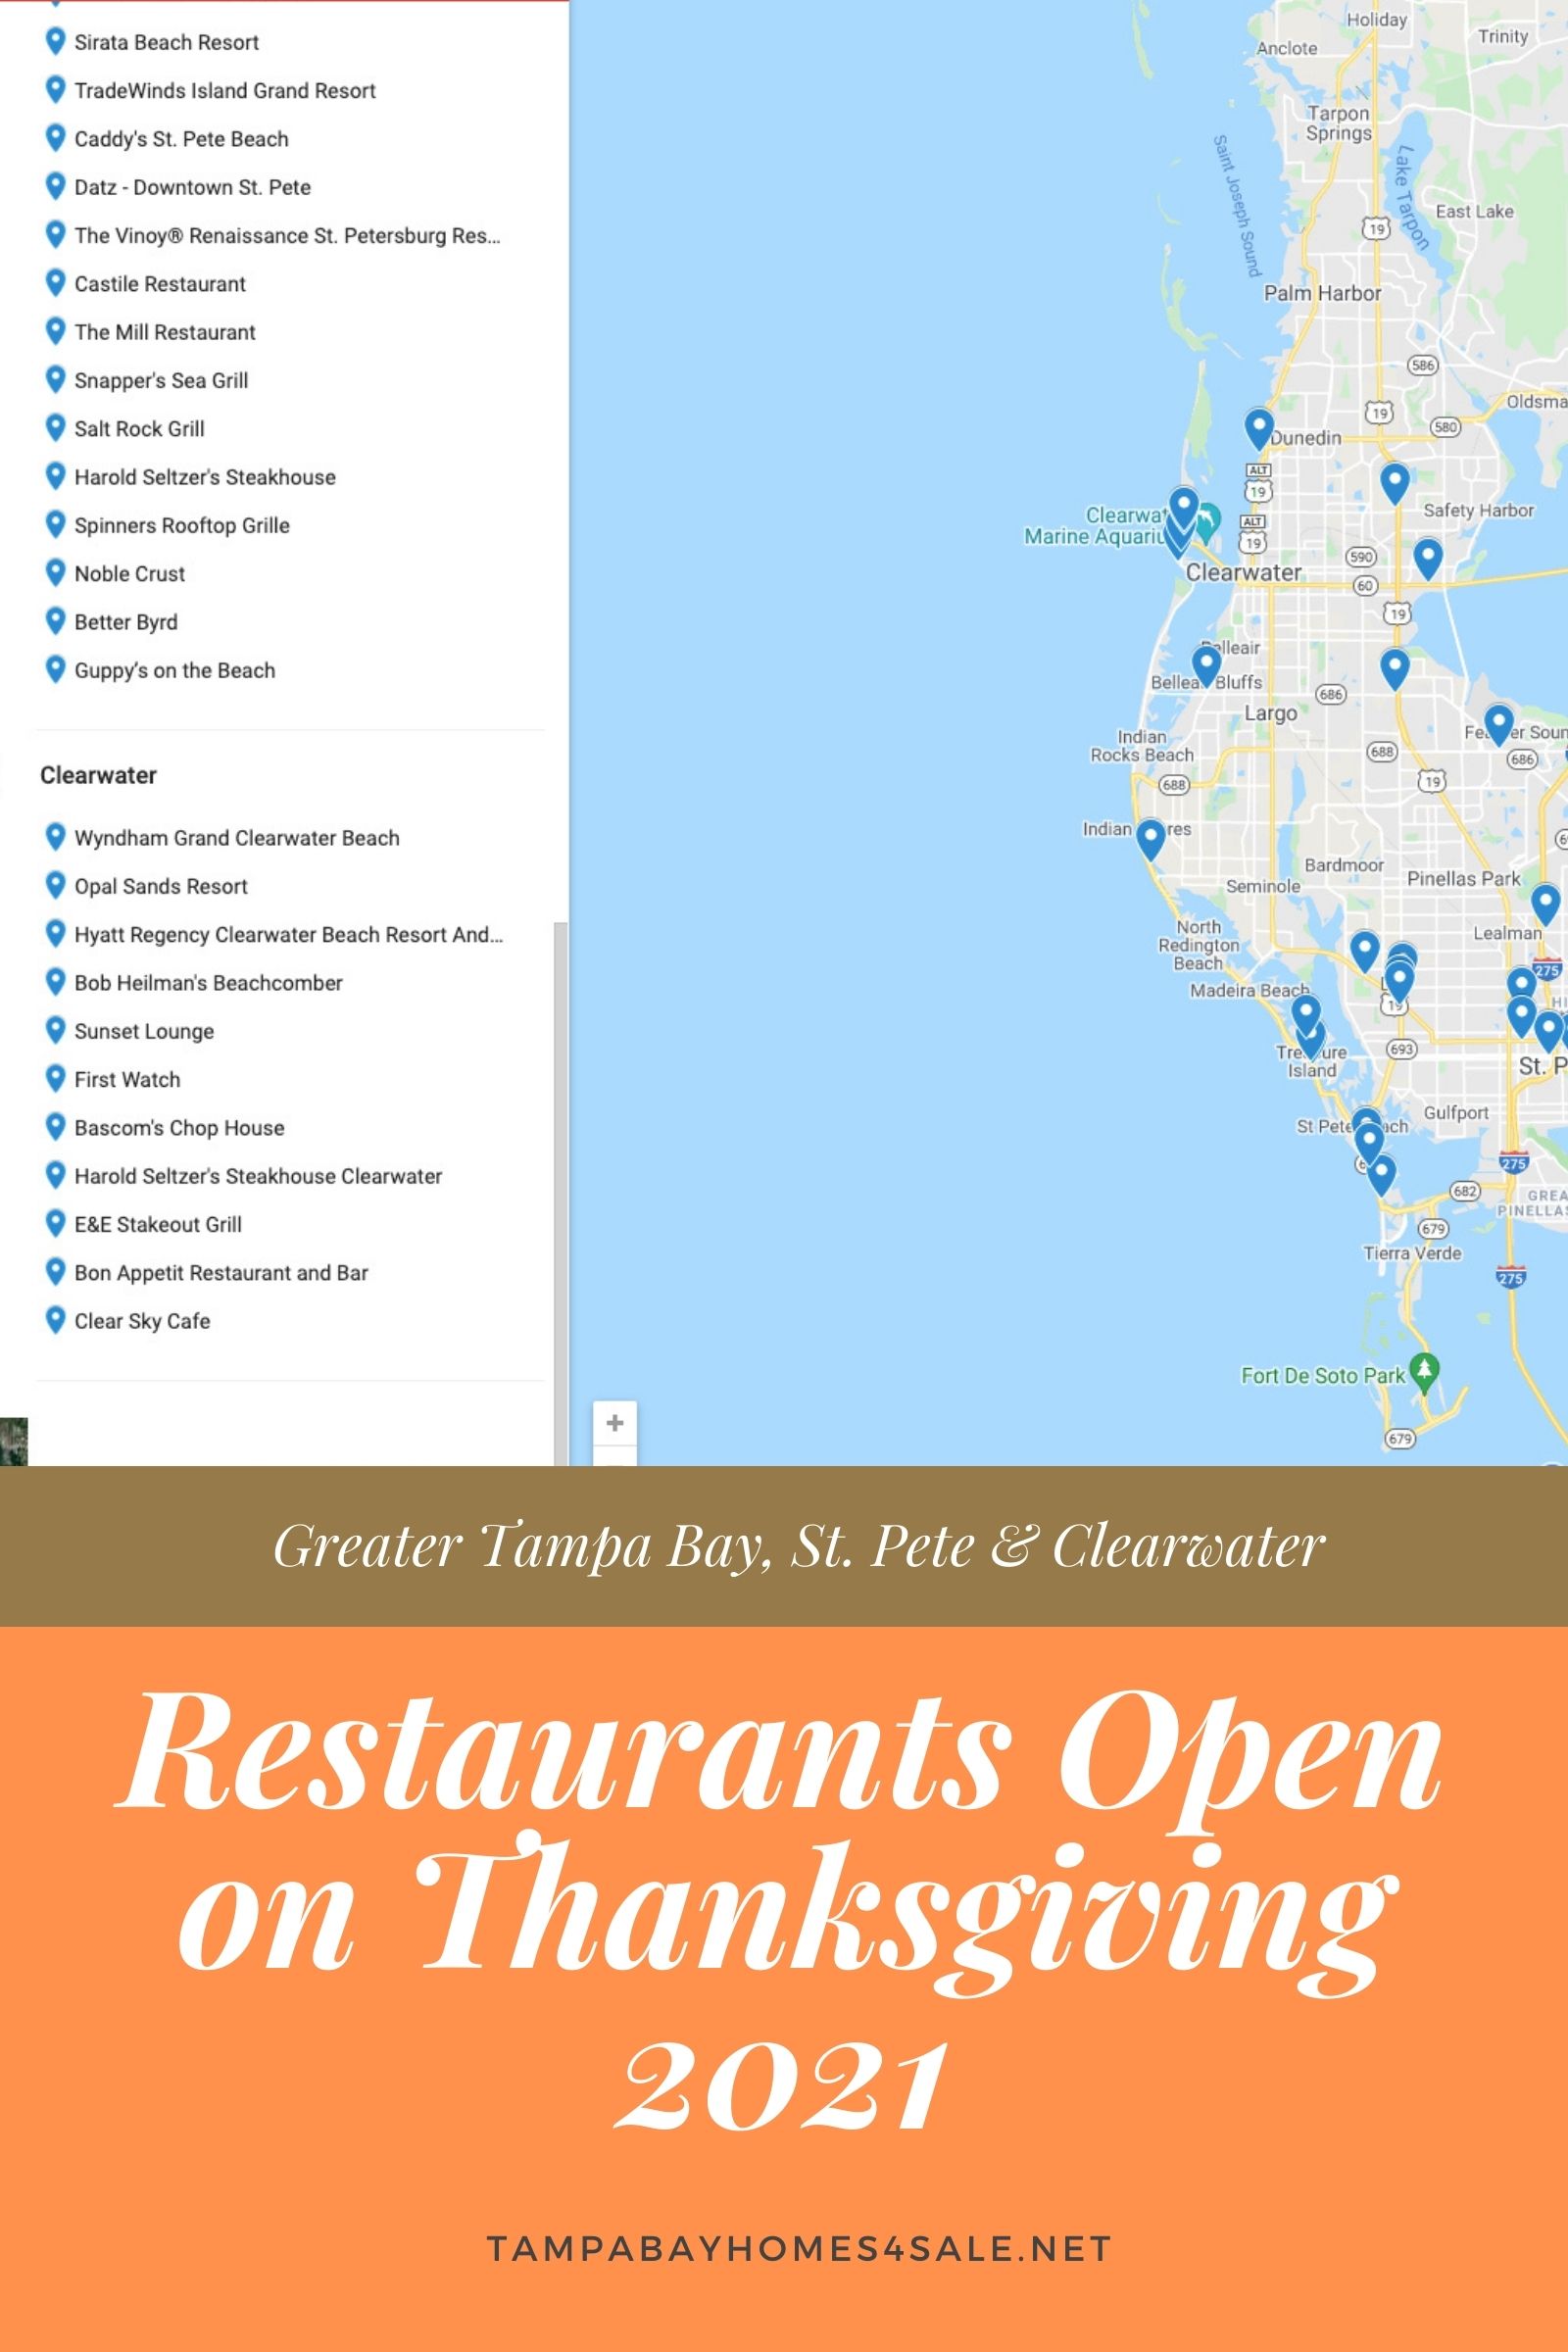 Tampa Bay St Pete's & Clearwater Area Restaurants Open on Thanksgiving 2021